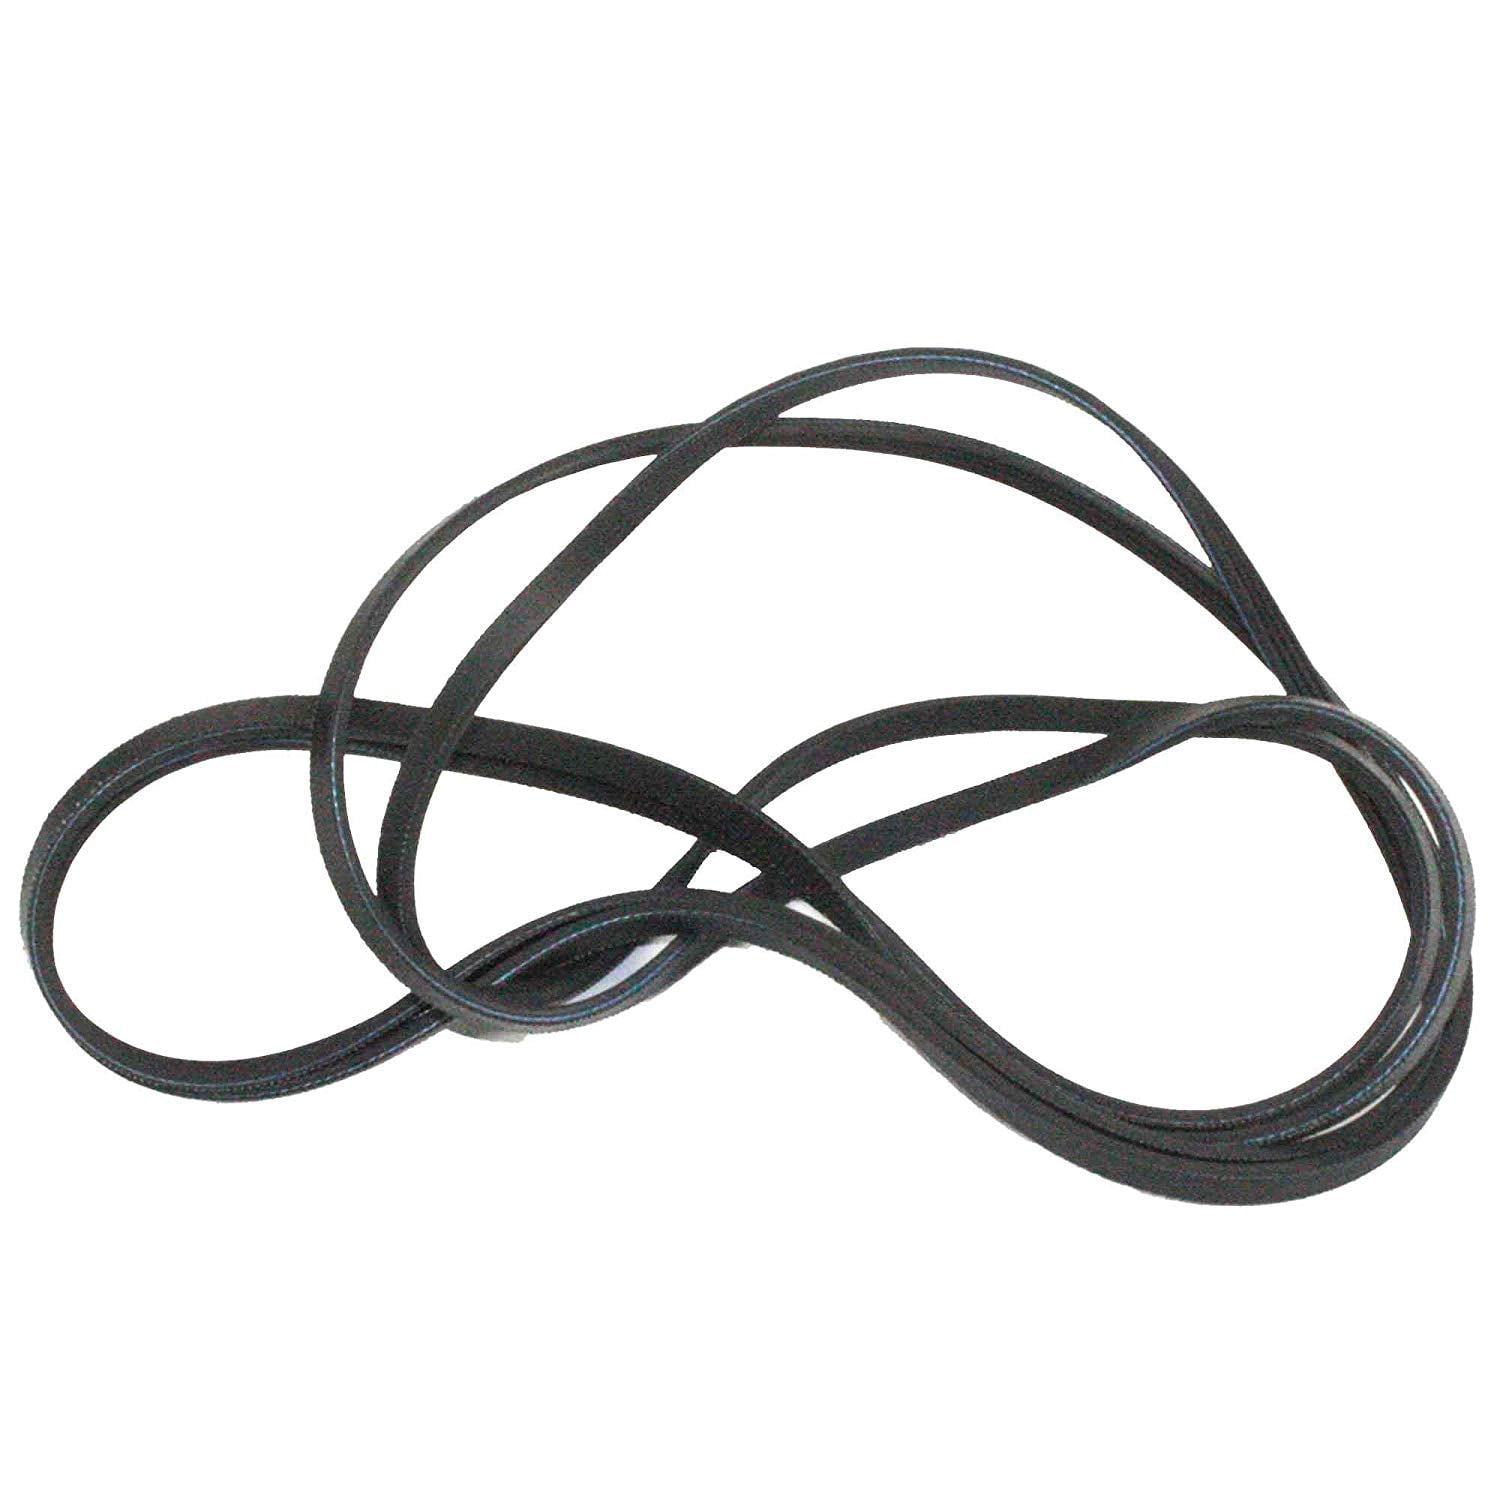 For Whirlpool Kenmore Dryer Replacement Drum Drive Belt PM-AP6013152 PM-8547157 